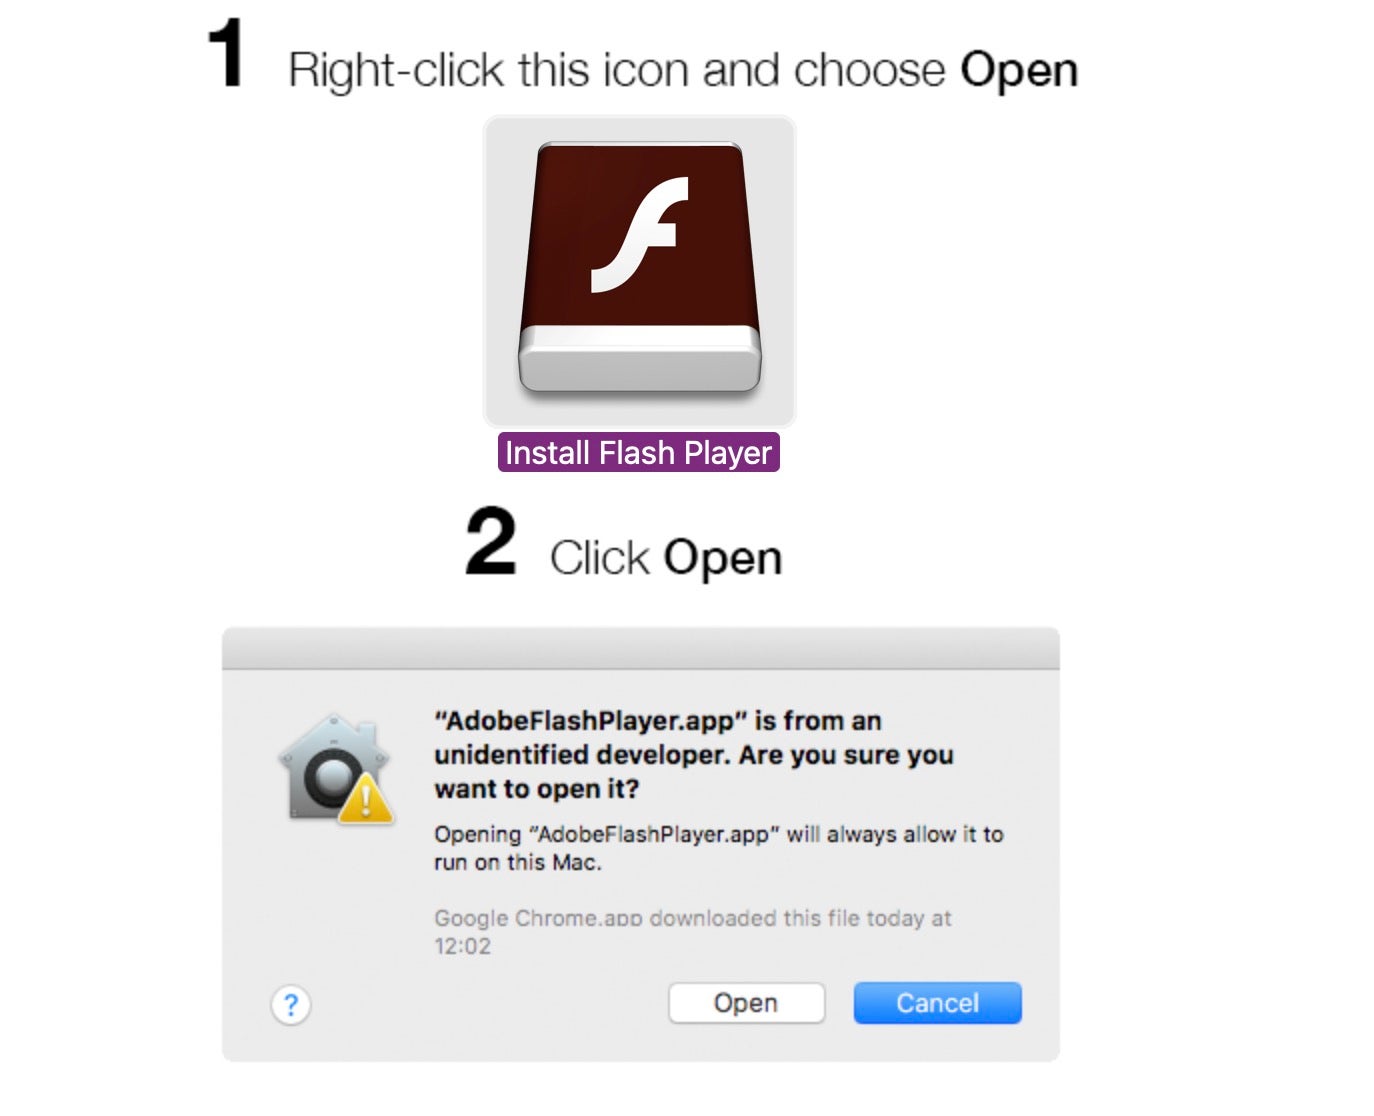 Lure for a cracked version of Adobe Photoshop leads to an adware installer